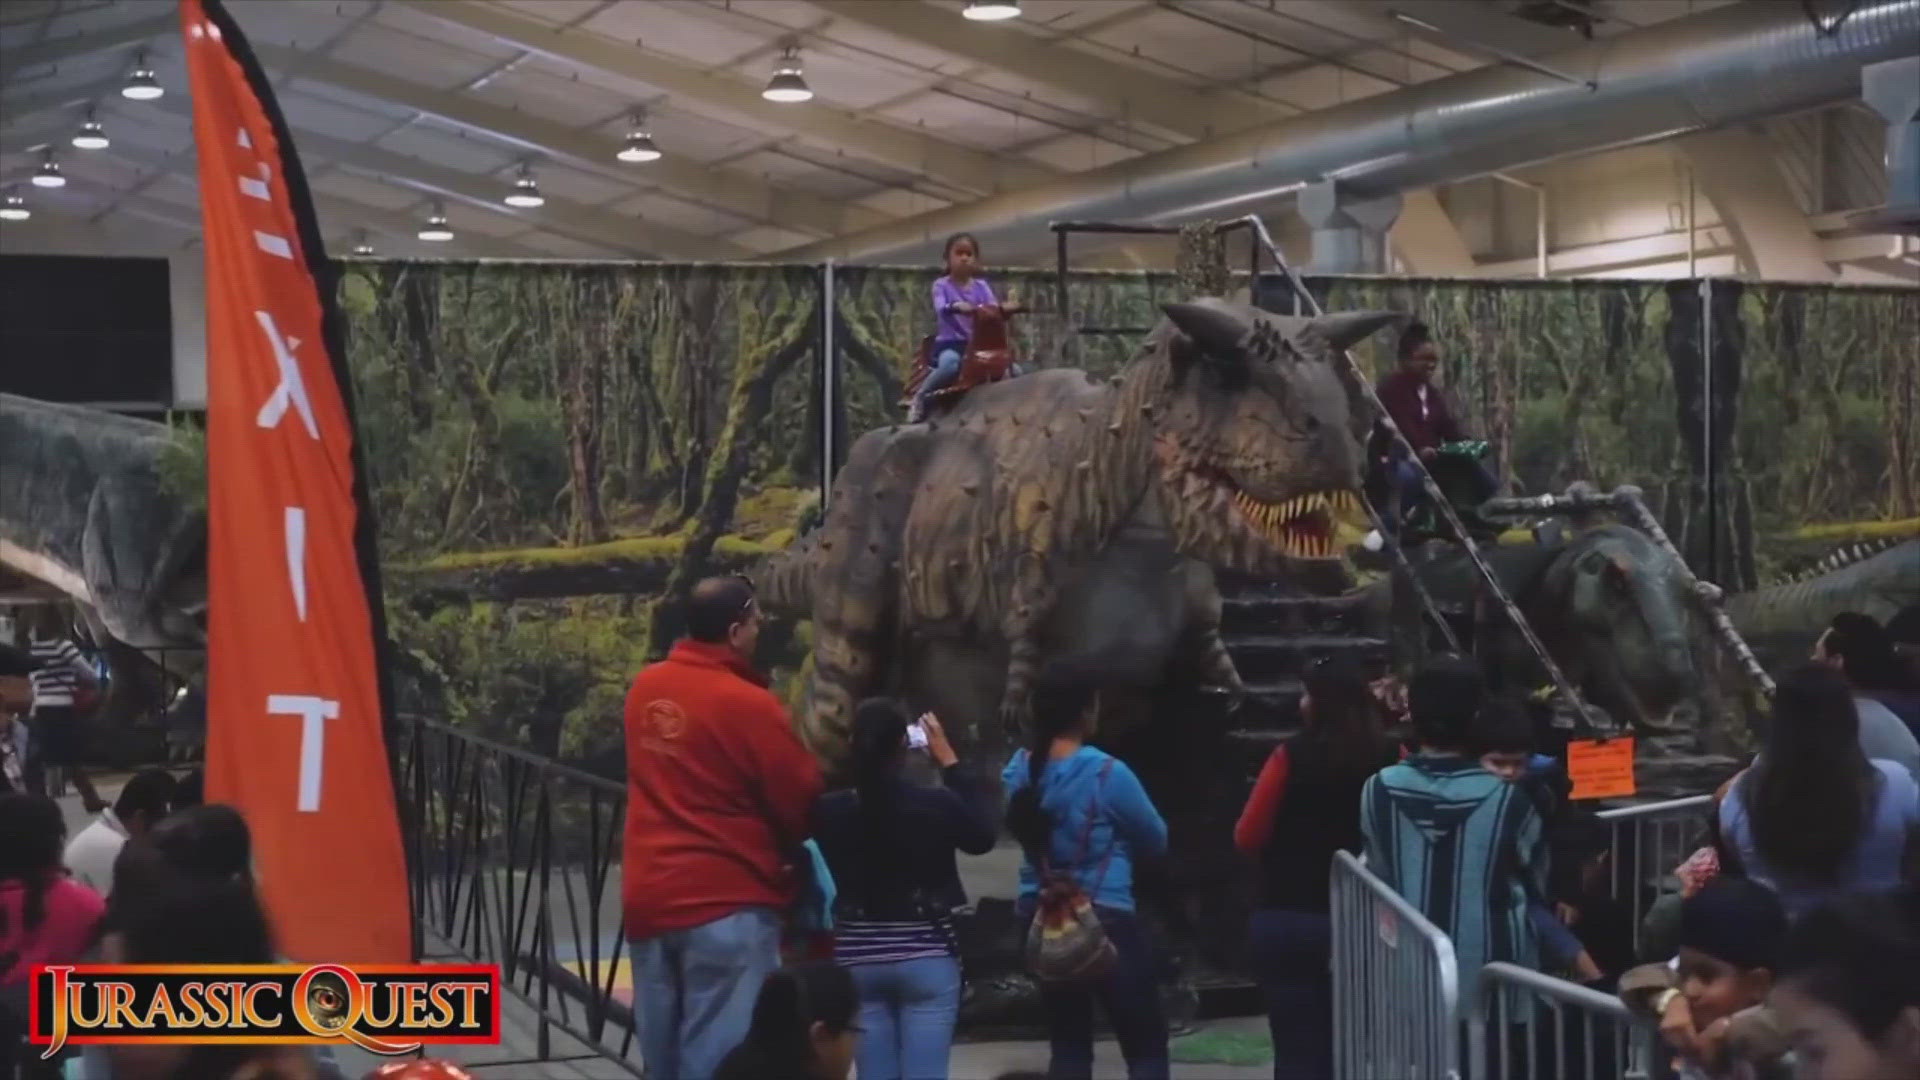 Jurassic Quest is touted as "the largest and most realistic dinosaur exhibition in North America."